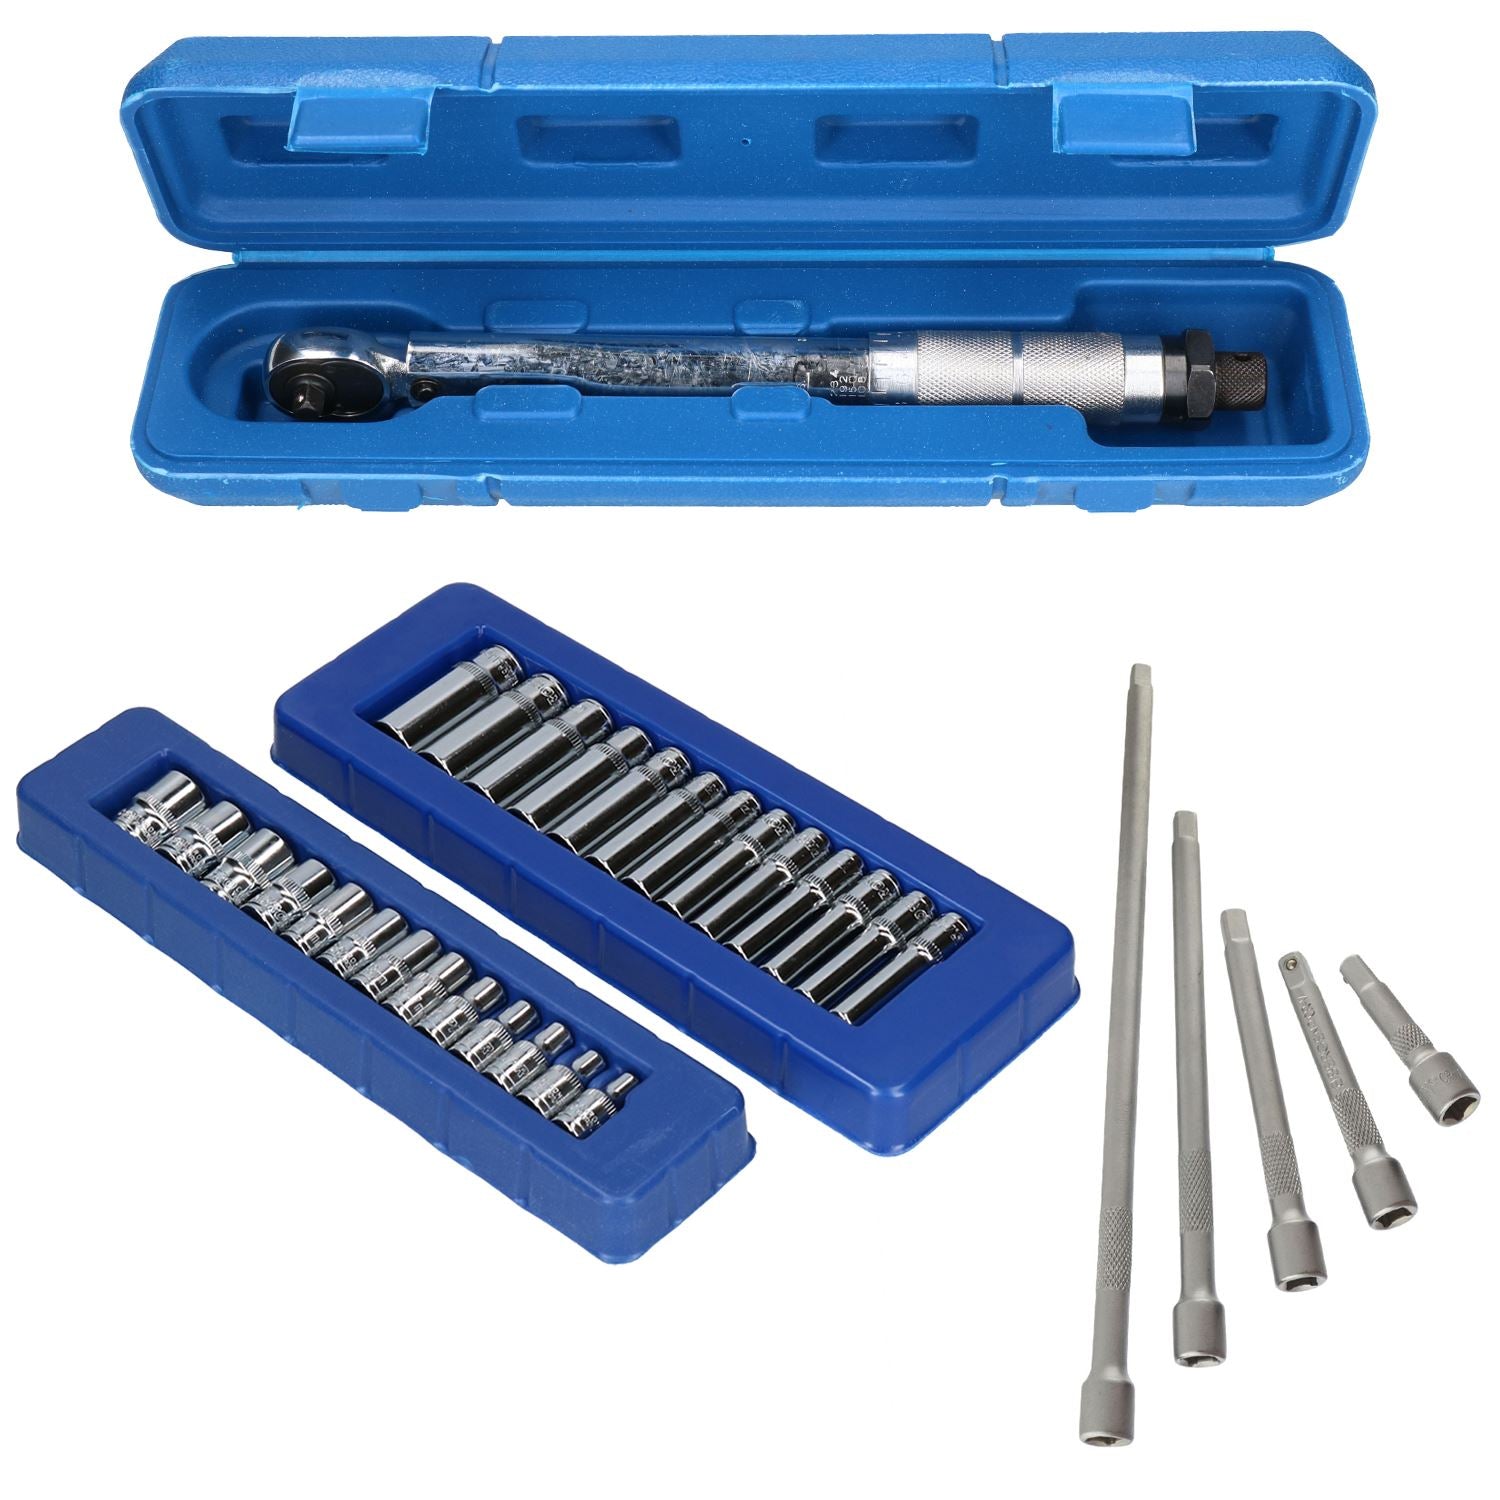 1/4" Drive Click Torque Wrench 5 - 25 Nm With Metric Sockets + 5pc Extensions